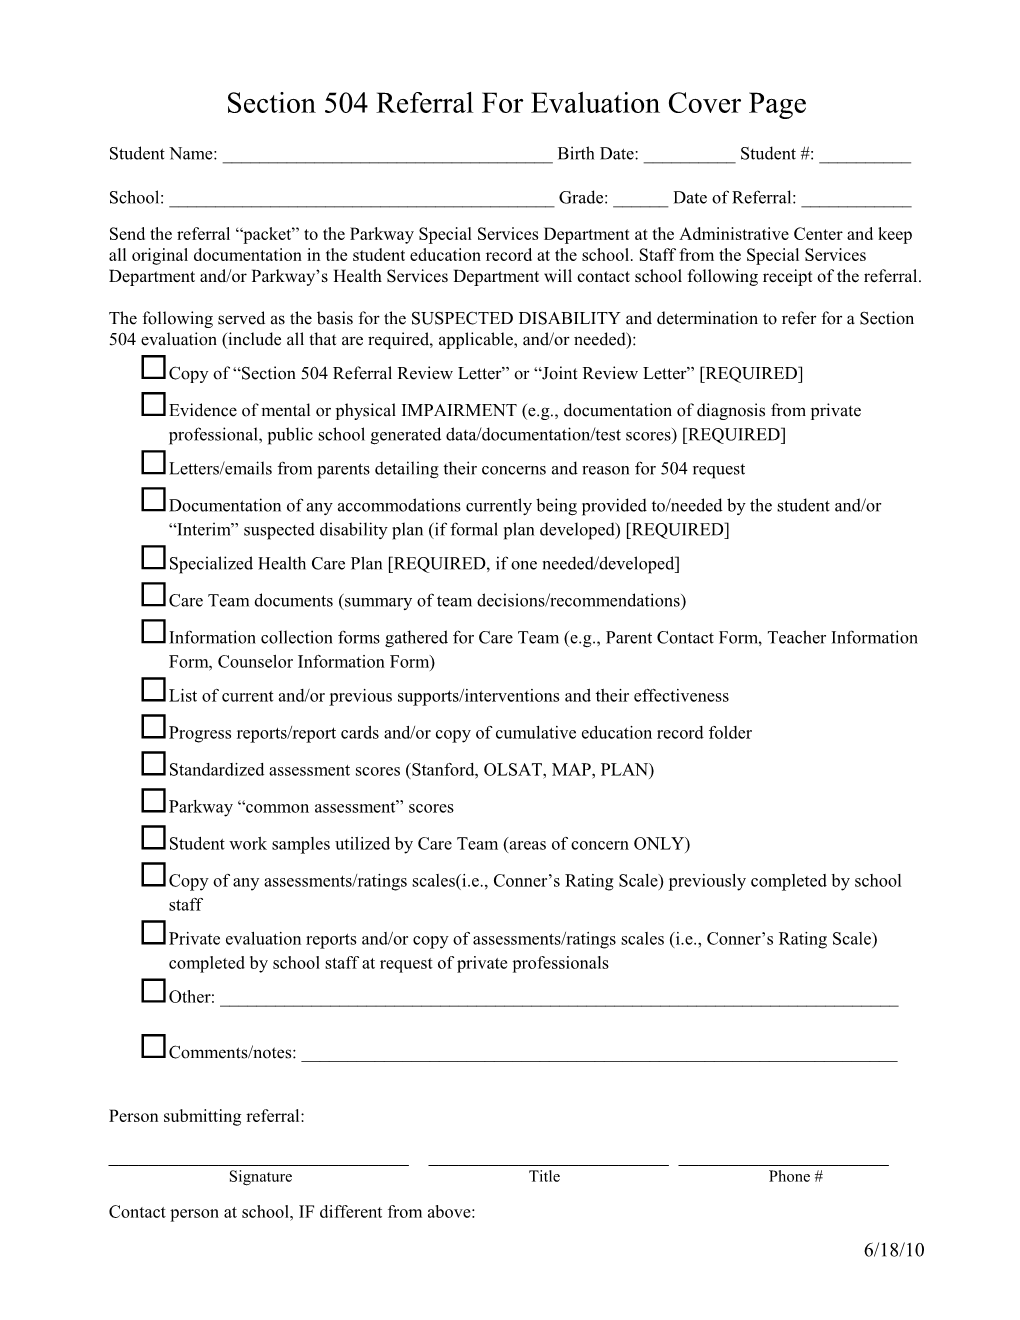 Section 504 Referral for Evaluation Cover Page